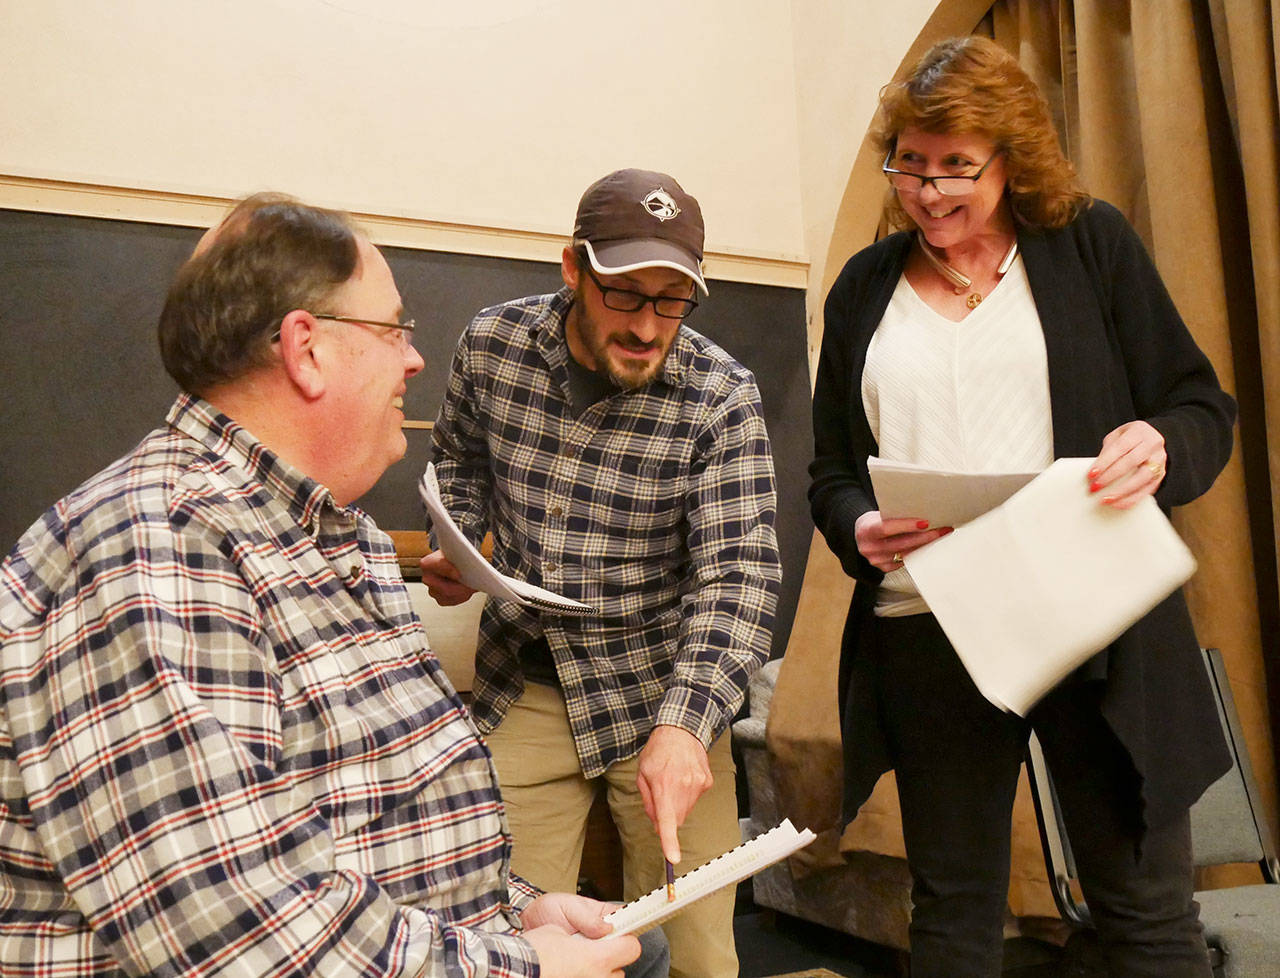 Director Josh Sutcliffe, center, works with cast members Steve Rodeman, left, and Sara Nicholls for the upcoming Olympic Theatre Arts production of “Bakersfield Mist,” which hits the stage Jan. 18.